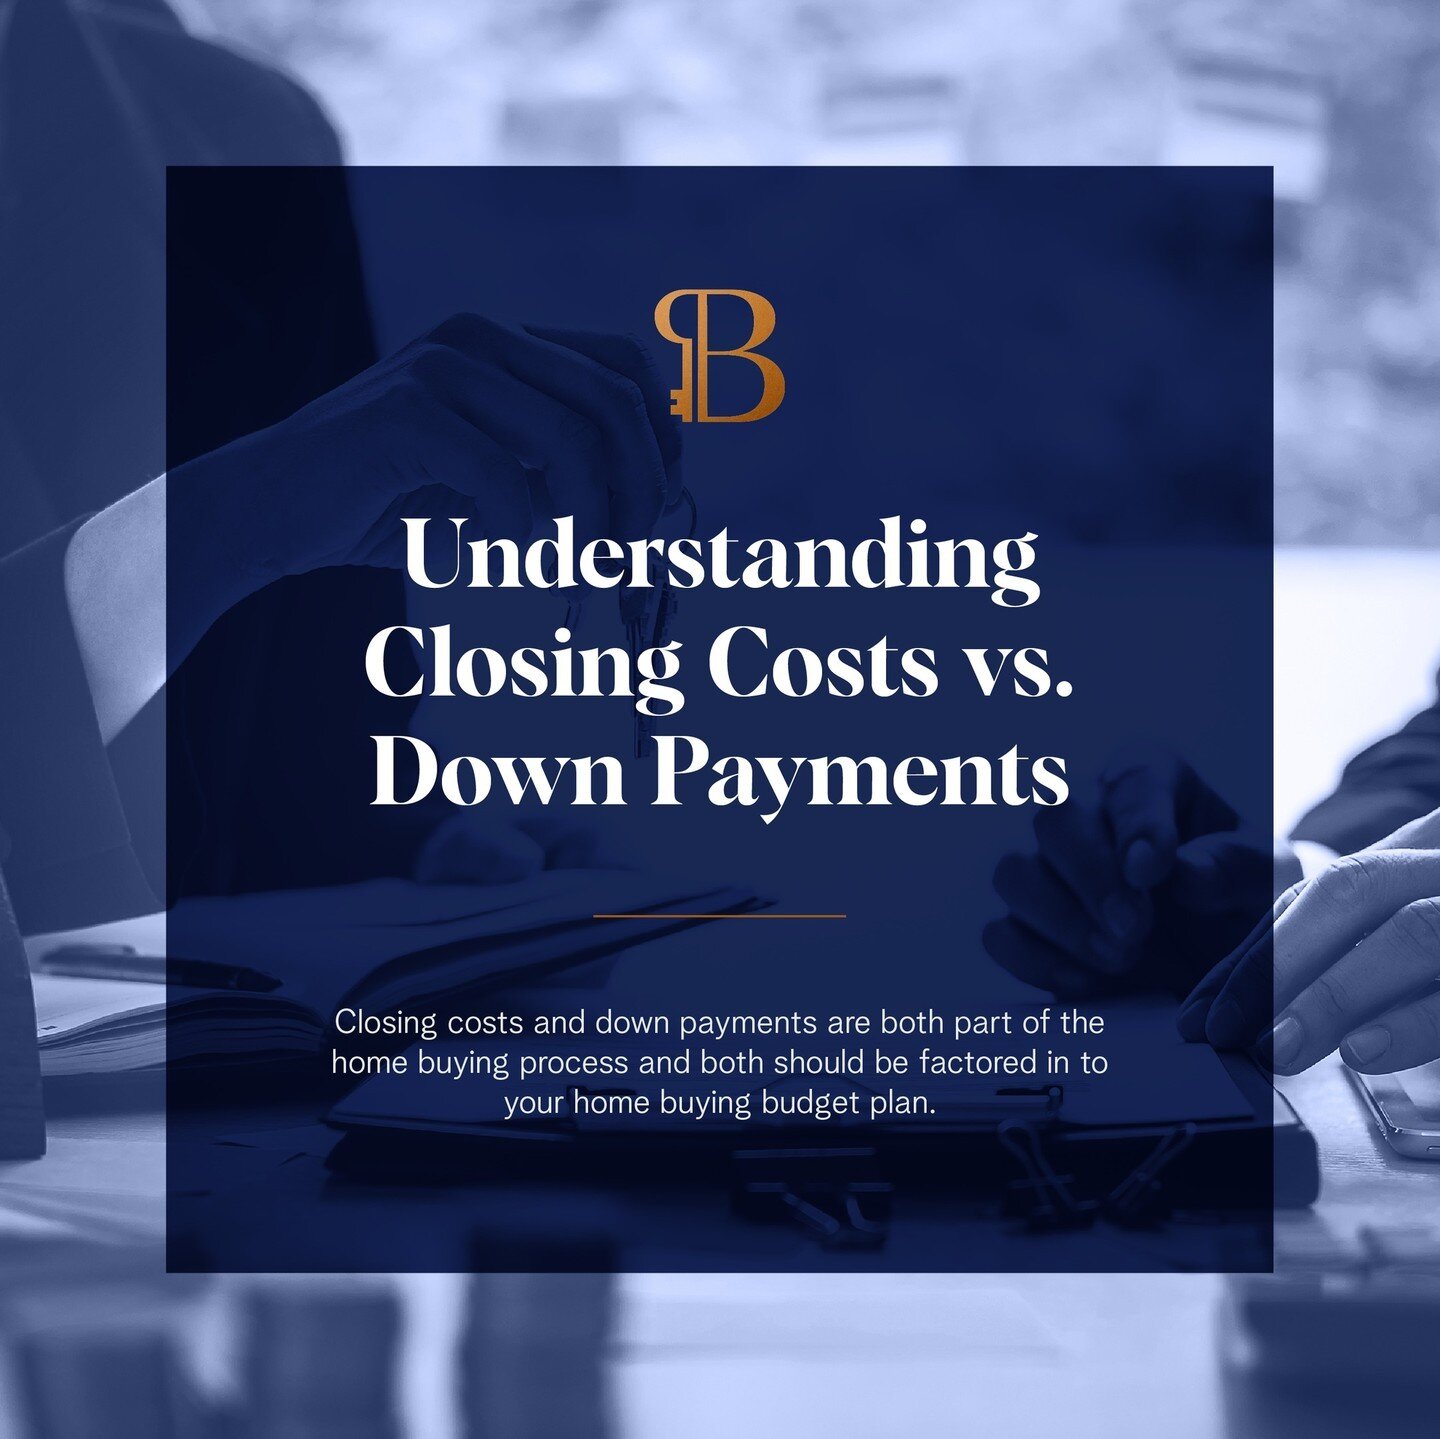 As a first-time home buyer, you have questions. We get it, and we're here to help!⁠
⁠
There might be some confusion around the difference between closing costs and your down payment. They may seem like the same thing, but they're not. However, they b